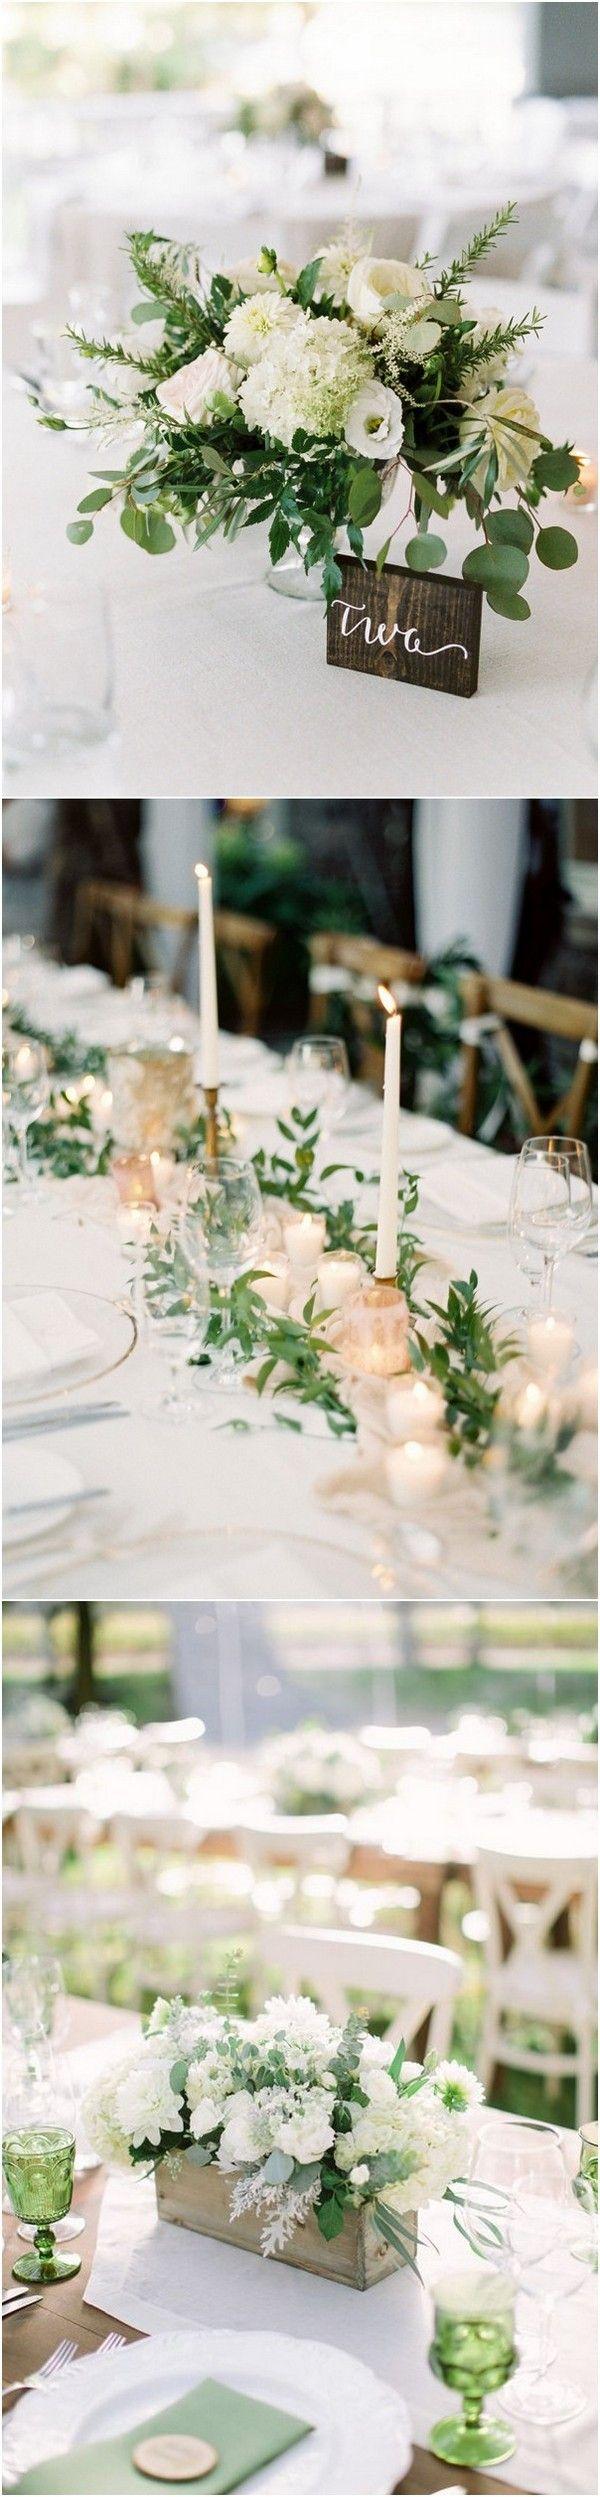 Wedding - Trending-20 Chic White And Green Wedding Centerpiece Ideas - Page 2 Of 3